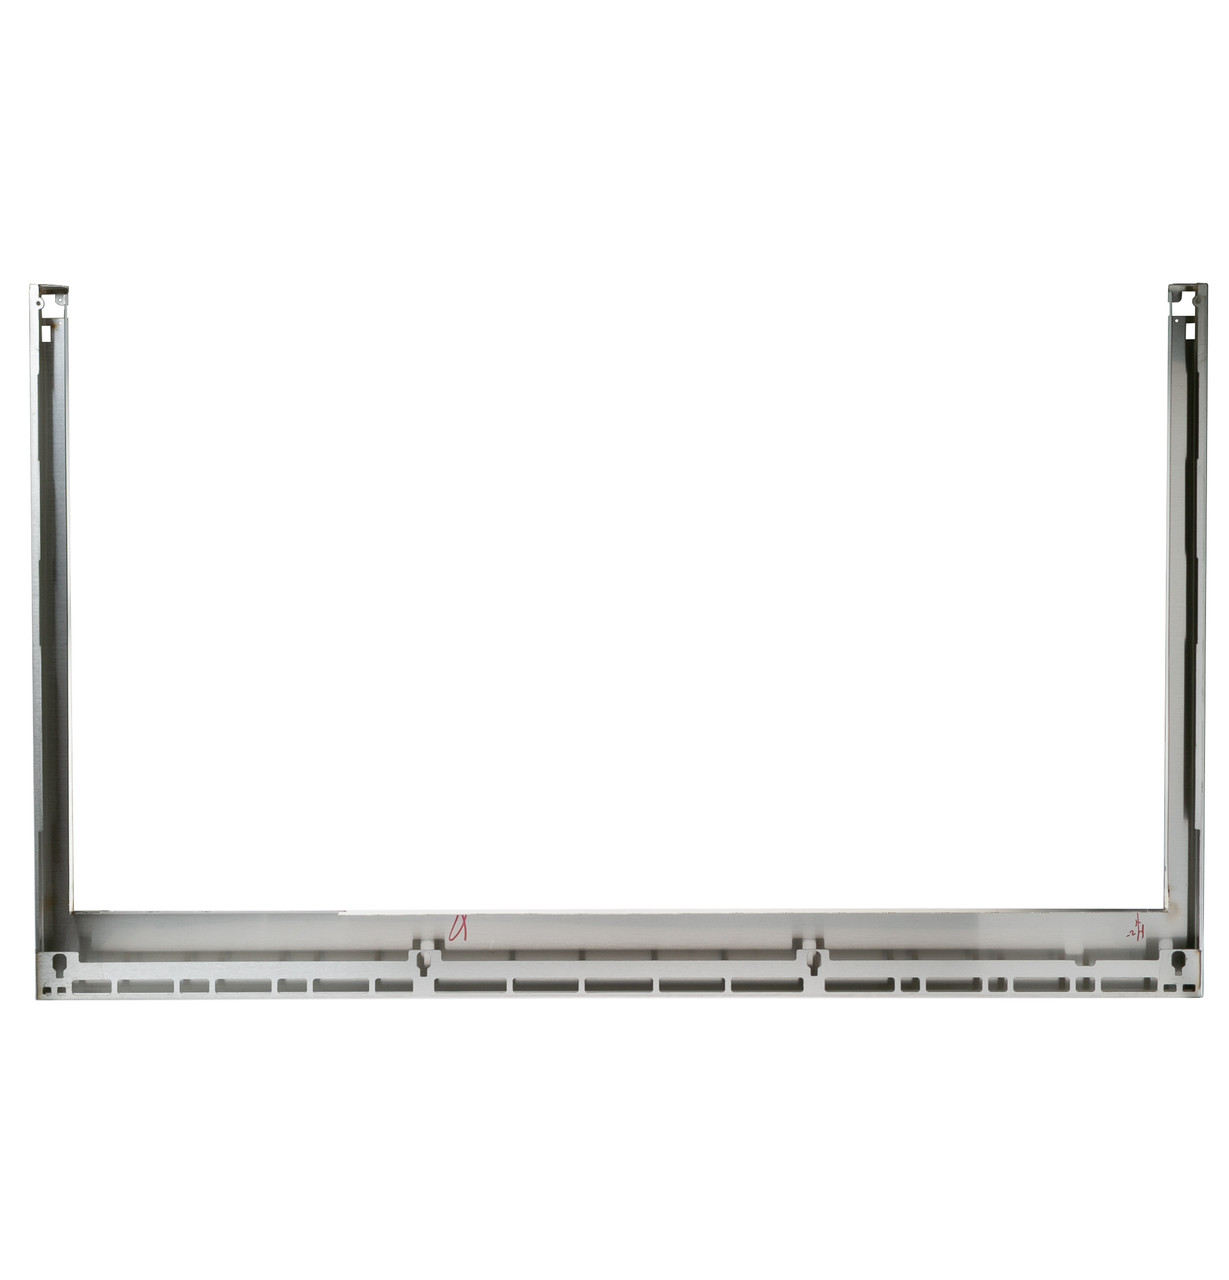 GE Appliances WB07X39467 - Stainless Steel Bullnose - Image 2